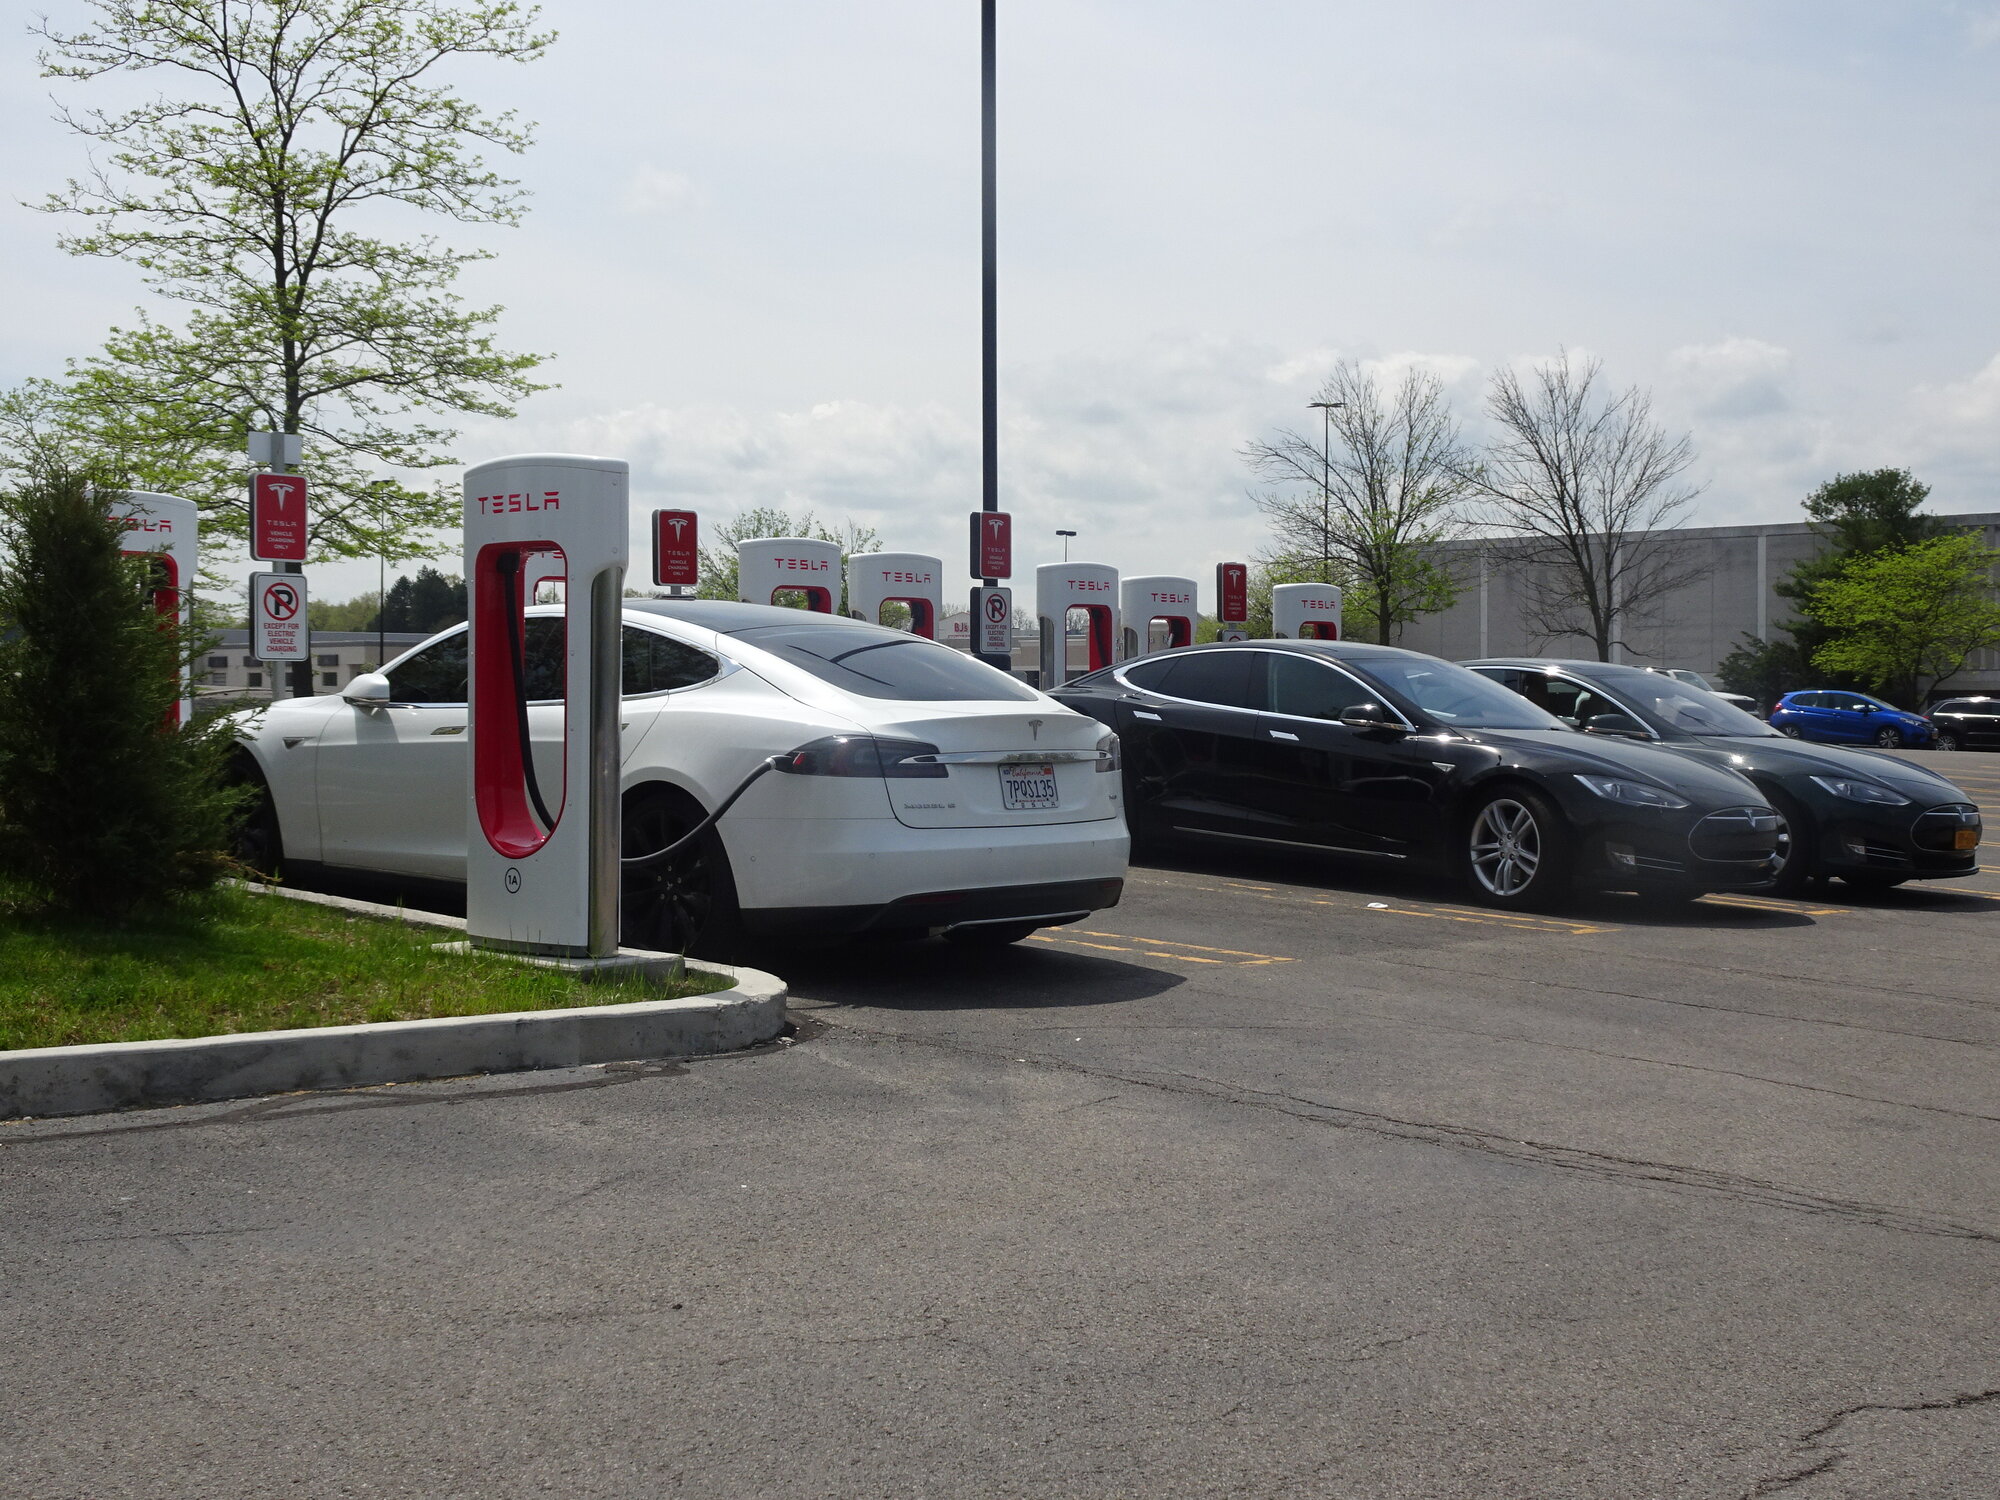 Victor_(Rochester)_NY_Tesla_Supercharger_at_Eastview_Mall_with_three_Model_S_sedans.jpg